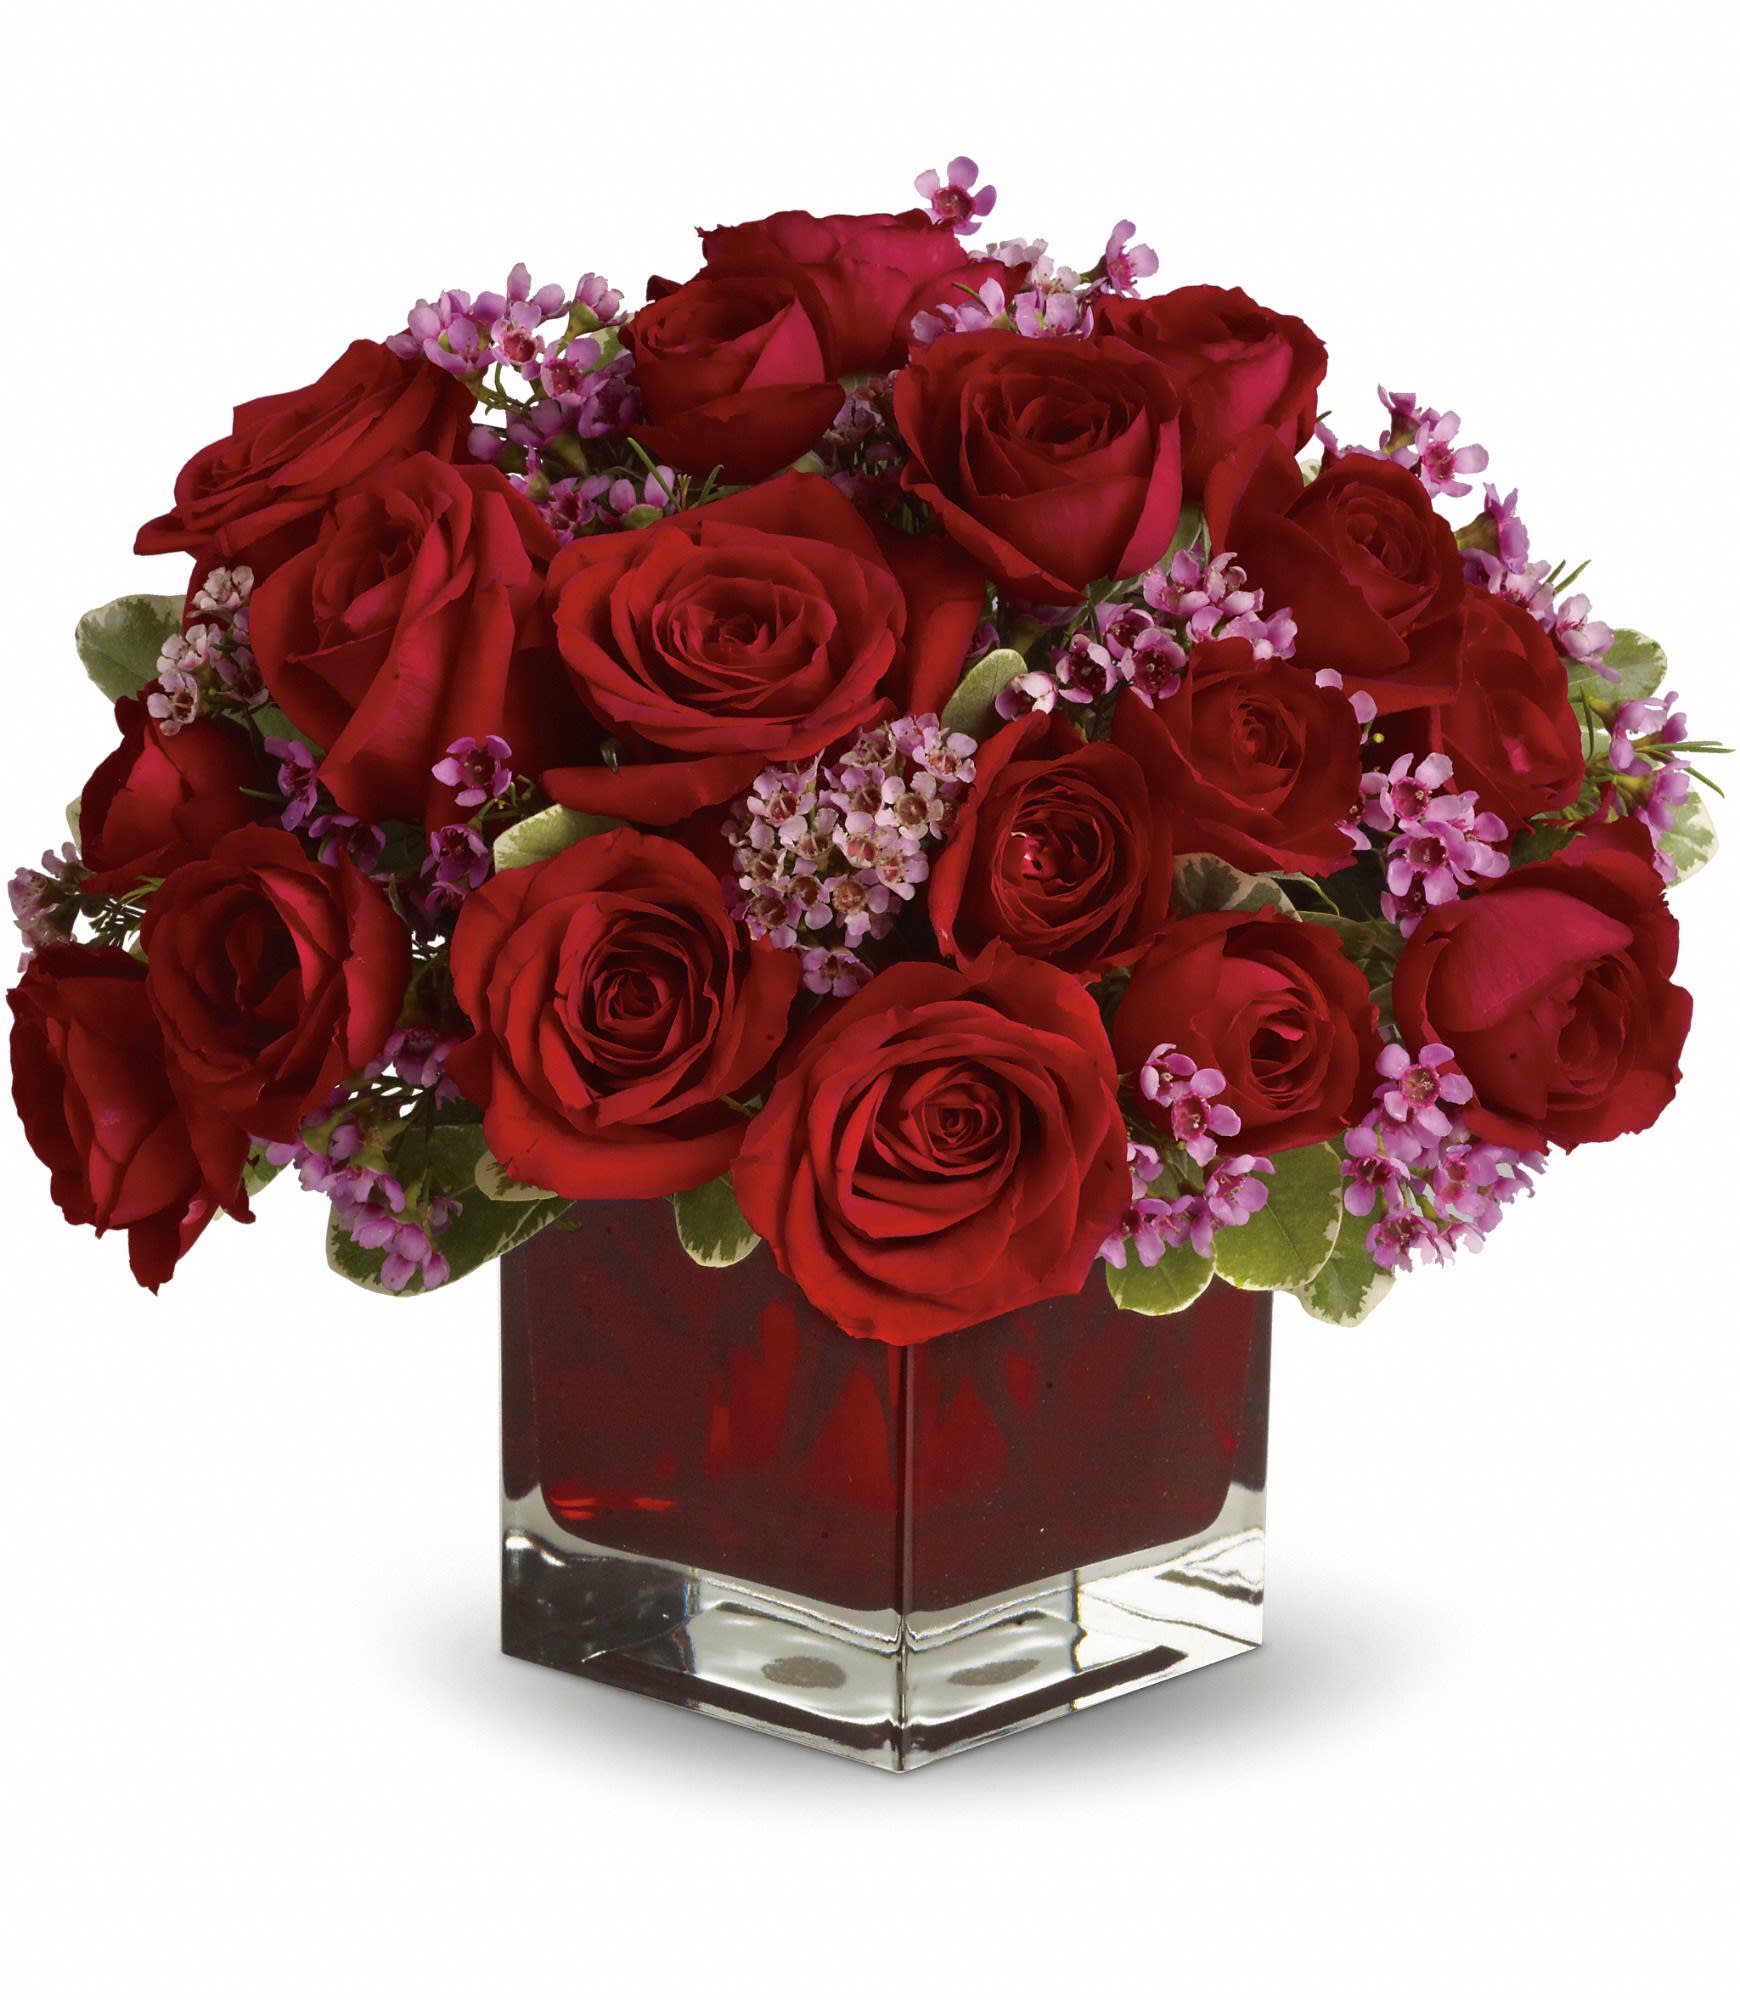 Never Let Go by Teleflora - 18 Red Roses  - Let someone special know how much their love means to you by sending them this truly original arrangement. A vision in red with lavender accents, this beautiful gift is a poignant way to celebrate love that endures.  Eighteen pretty red roses with lavender waxflower and greens are delivered in a stunning ruby red cube vase.  Approximately 12&quot; W x 11&quot; H  Orientation: All-Around      As Shown : T65-1A     Deluxe : T65-1B     Premium : T65-1C  